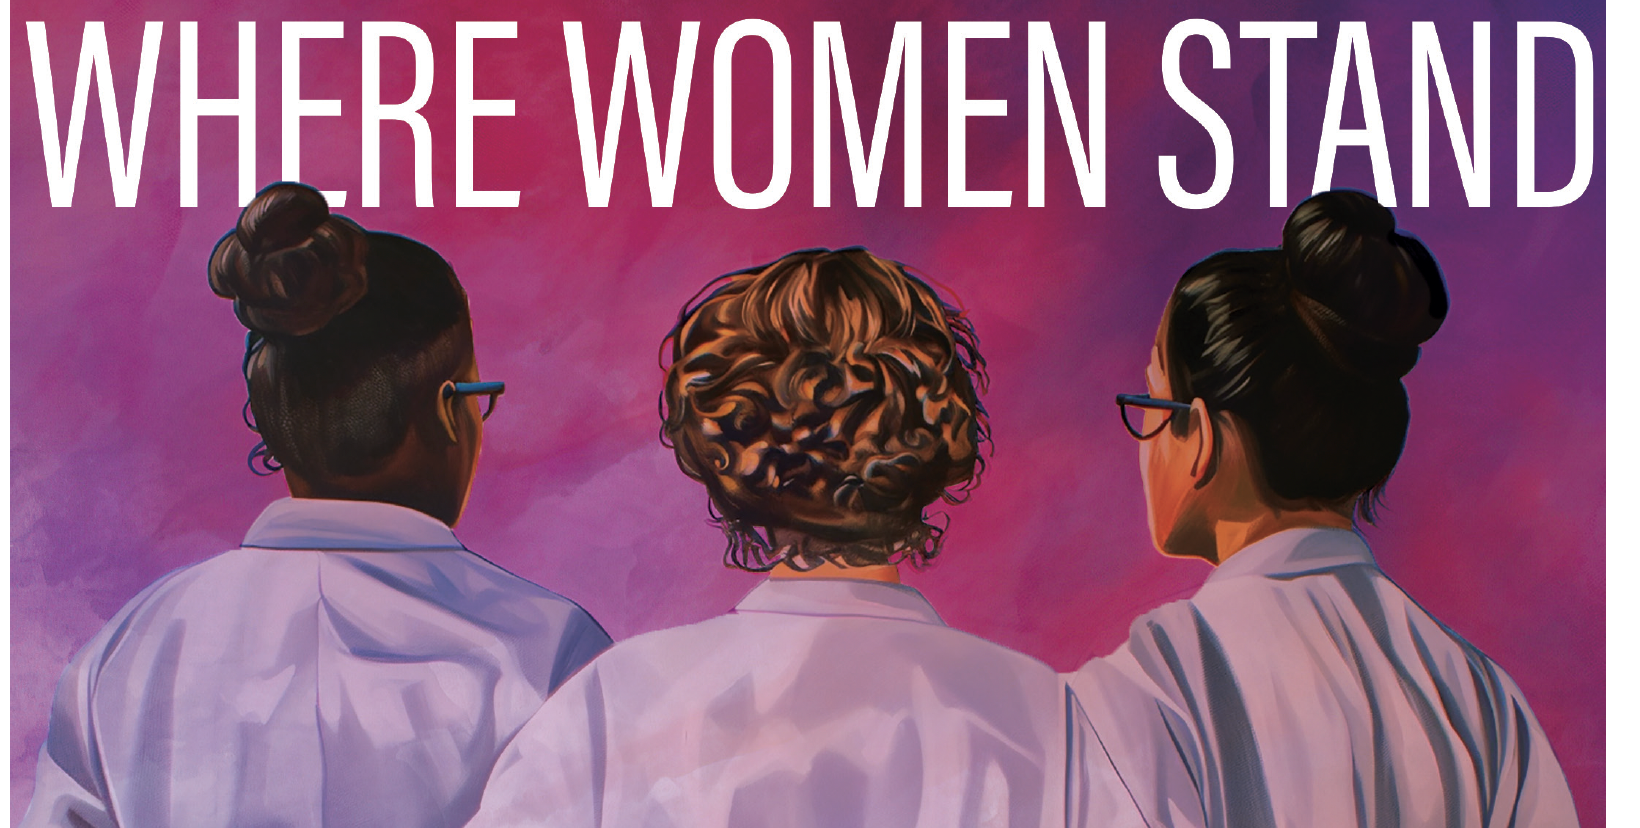 Three women in lab coats face away from the viewer. Over their heads, text reads, "Where Women Stand."